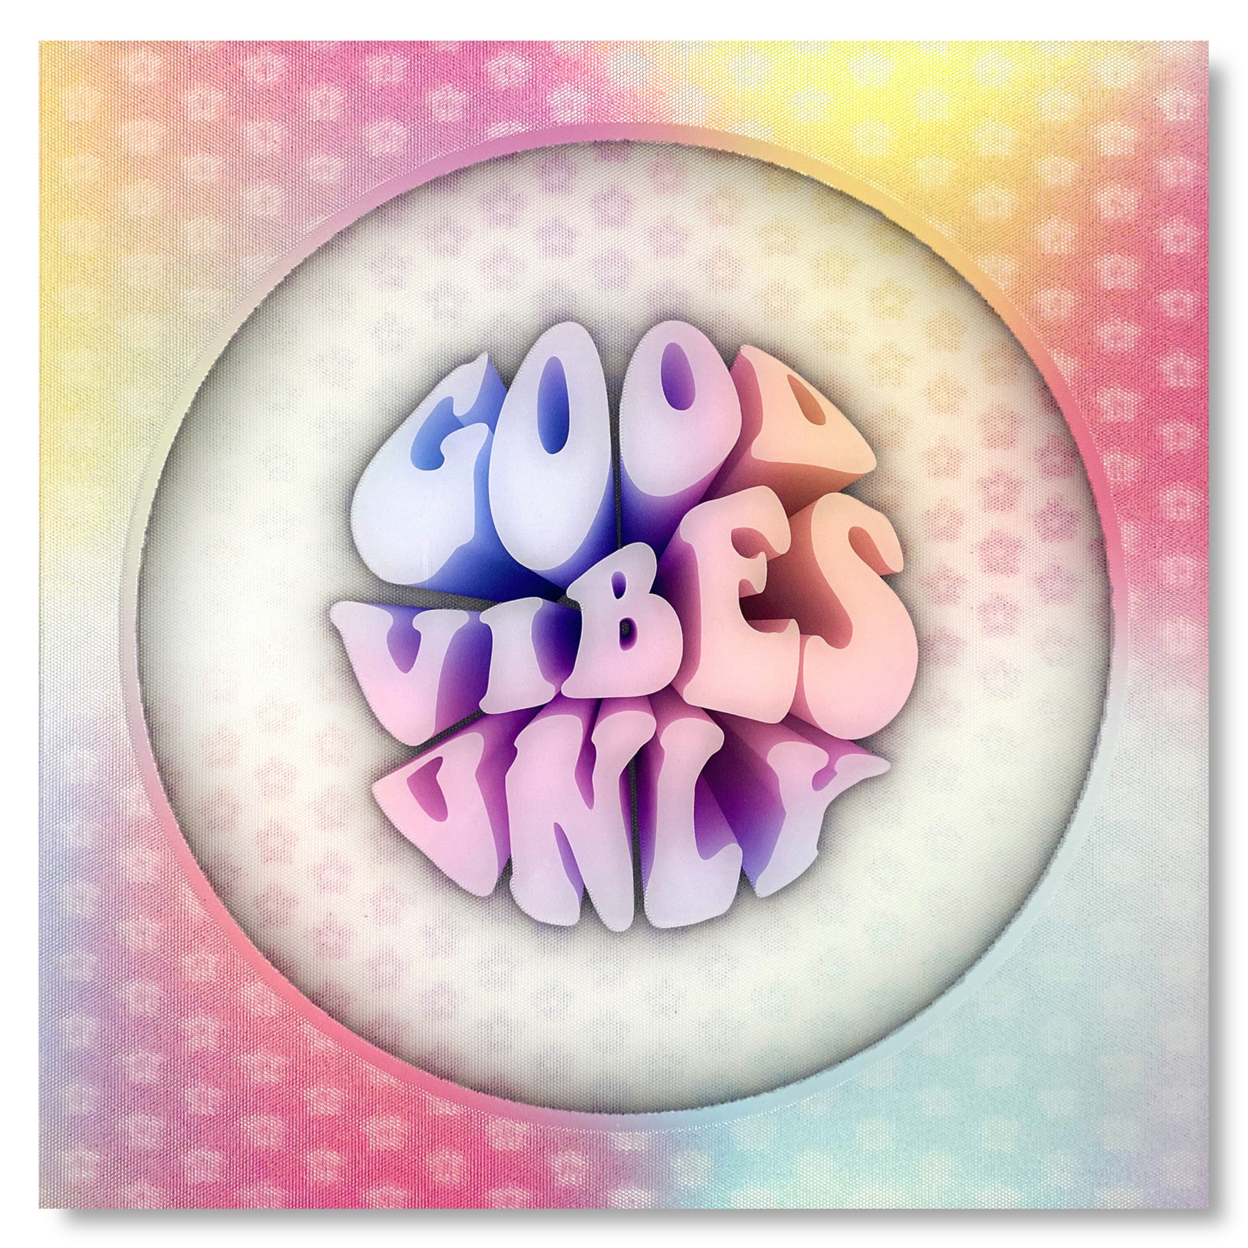 5D Multi-Dimensional Wall Art - Custom Made Good Vibes Wall Art Print On Strong Polycarbonate Panel W/ Vibrant Colors By Matashi (16x16 In)